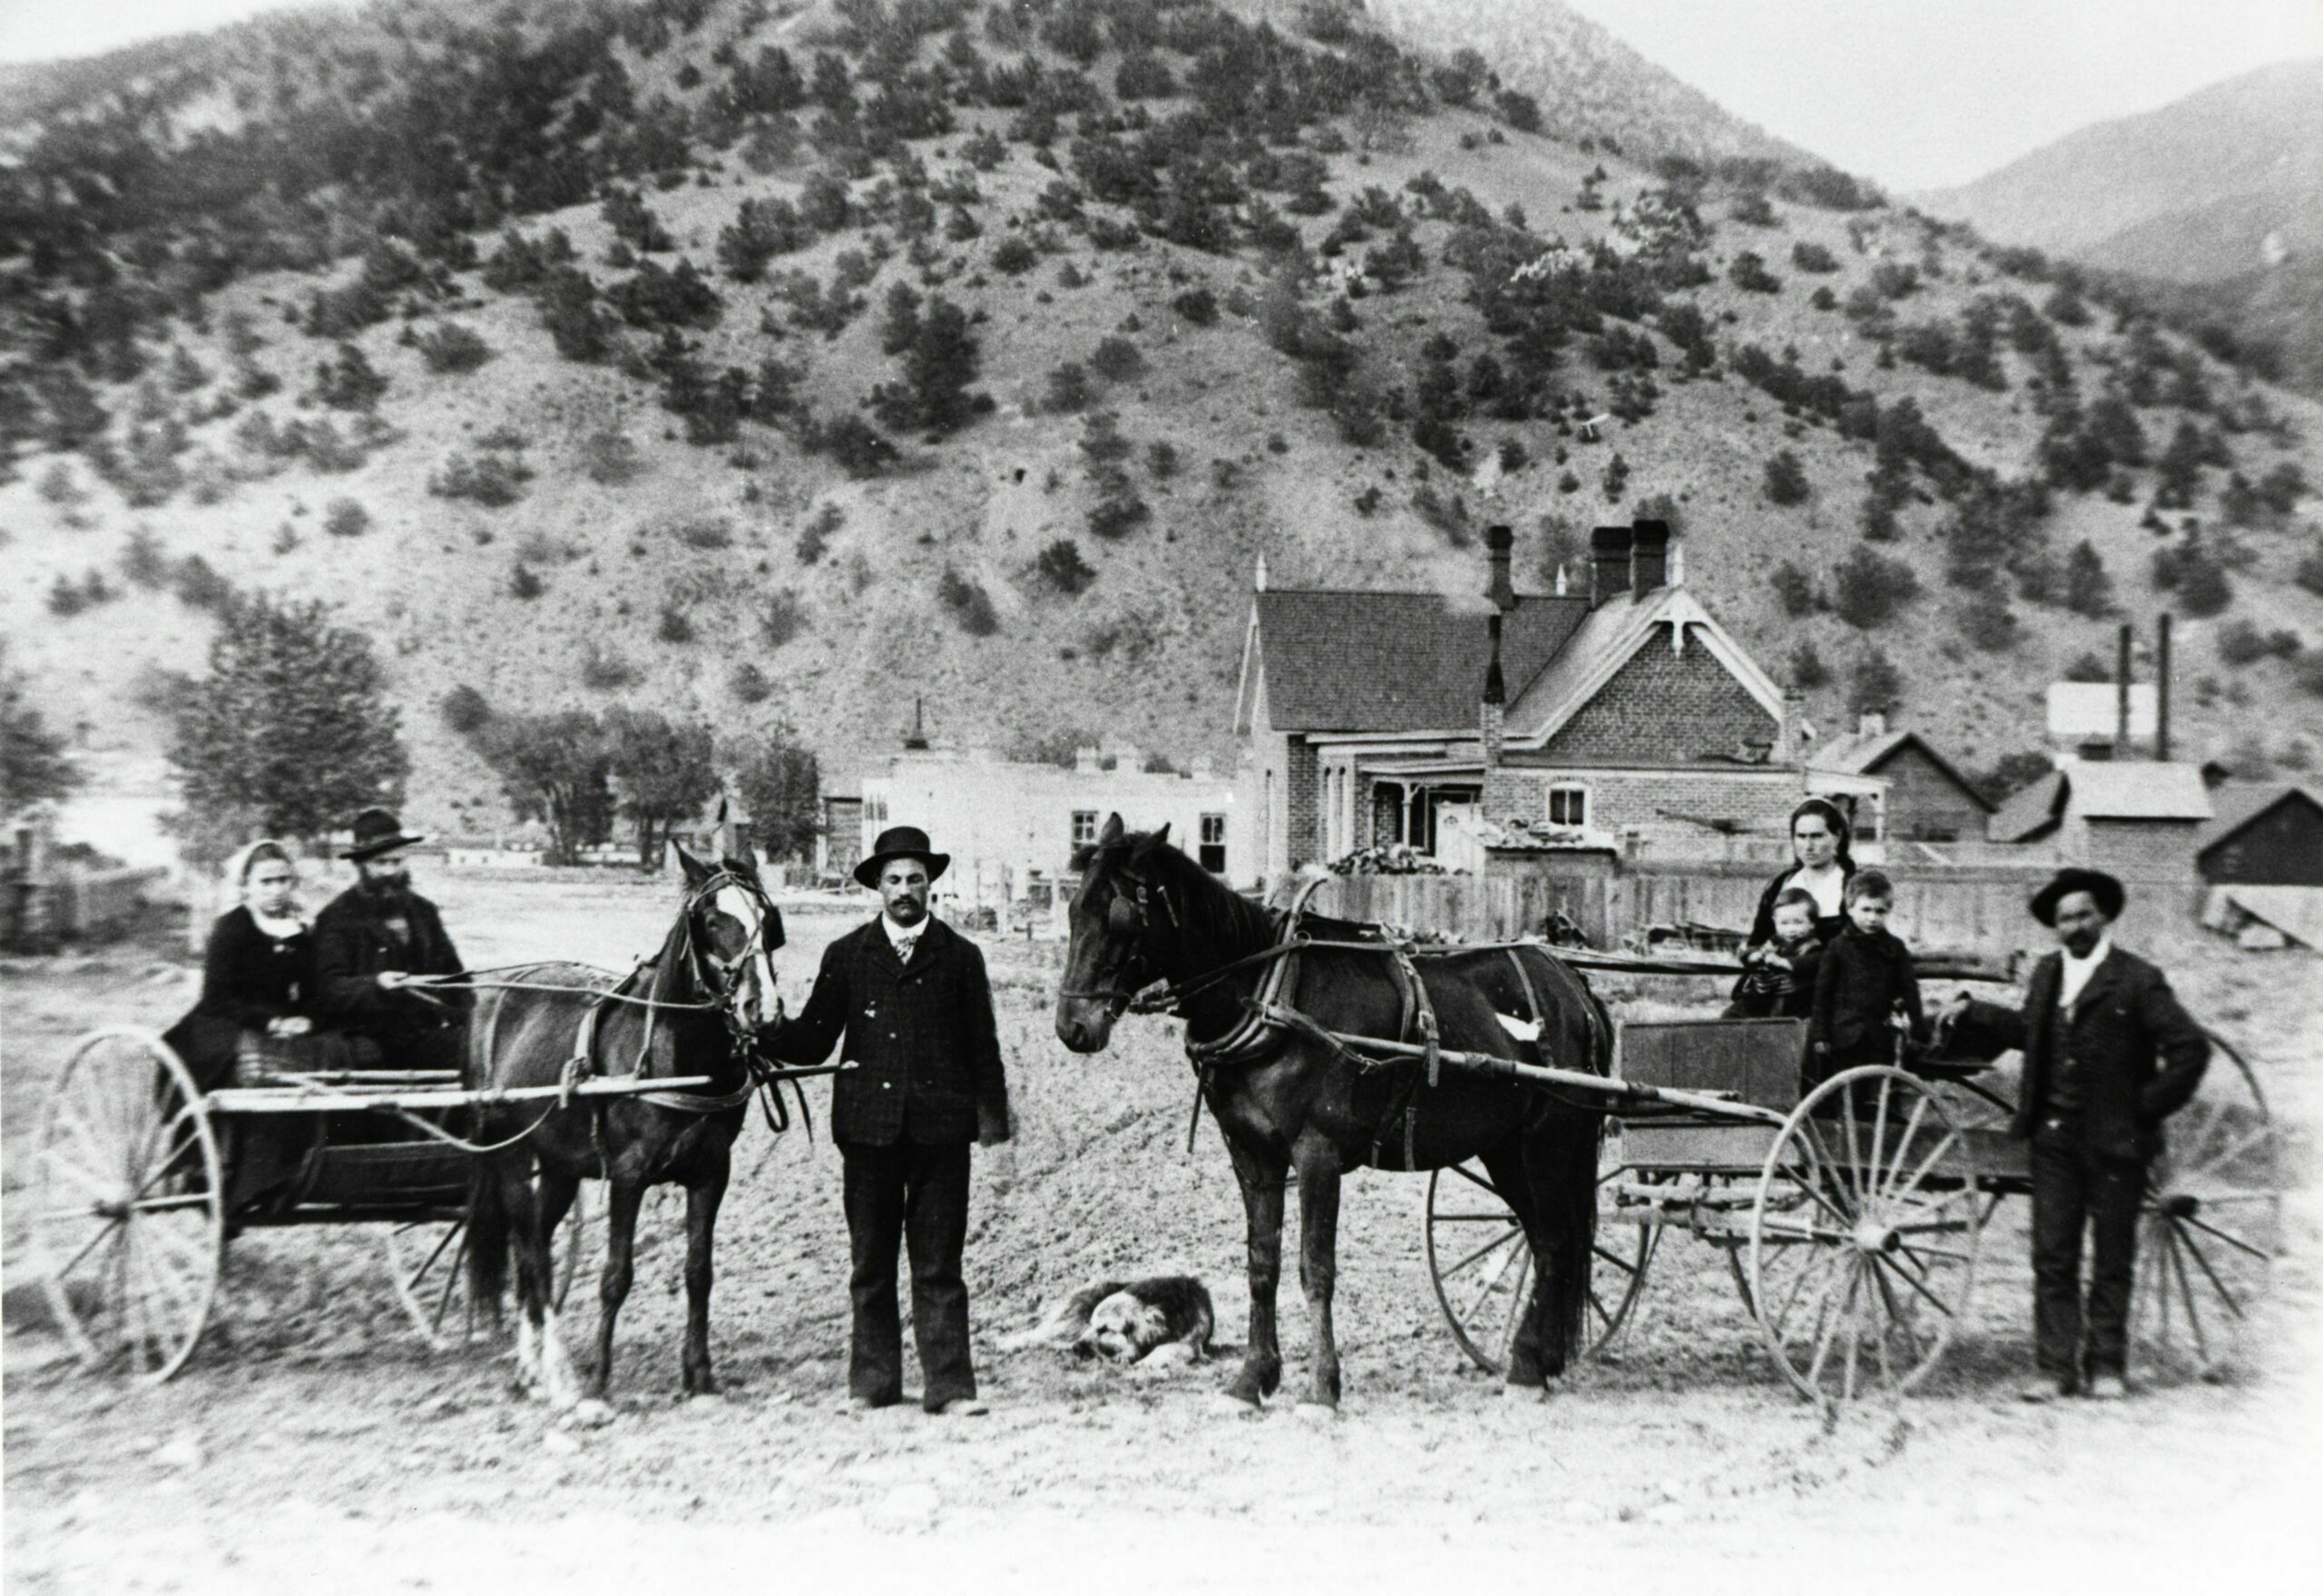 An unknown group. Tenderfoot Mountain is in the background, and 331 W. 2nd Street is the house on the right. It was built by William Van Every.